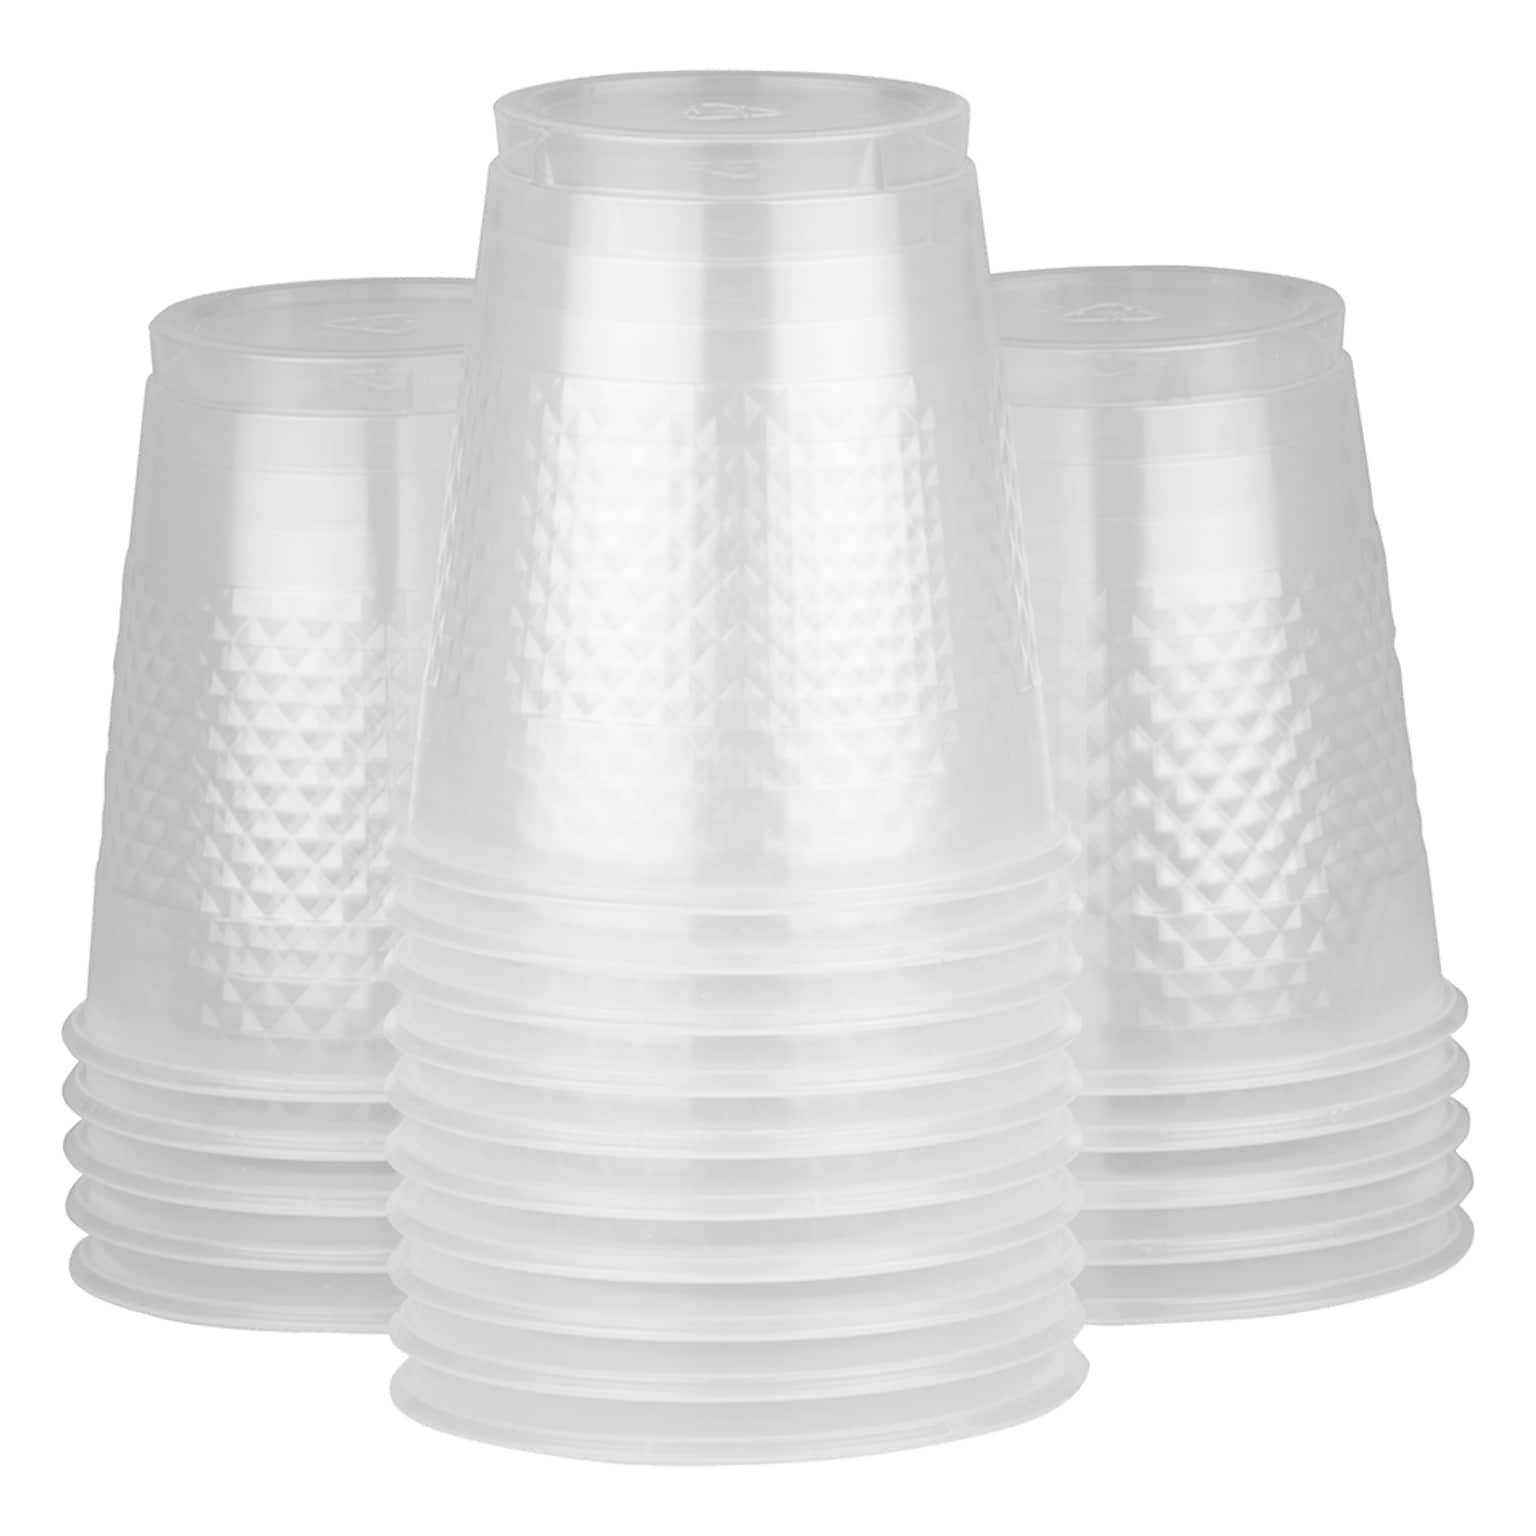 JAM Paper Plastic Party Cups, 12 oz, Clear, 20 Glasses/Pack (255529346)